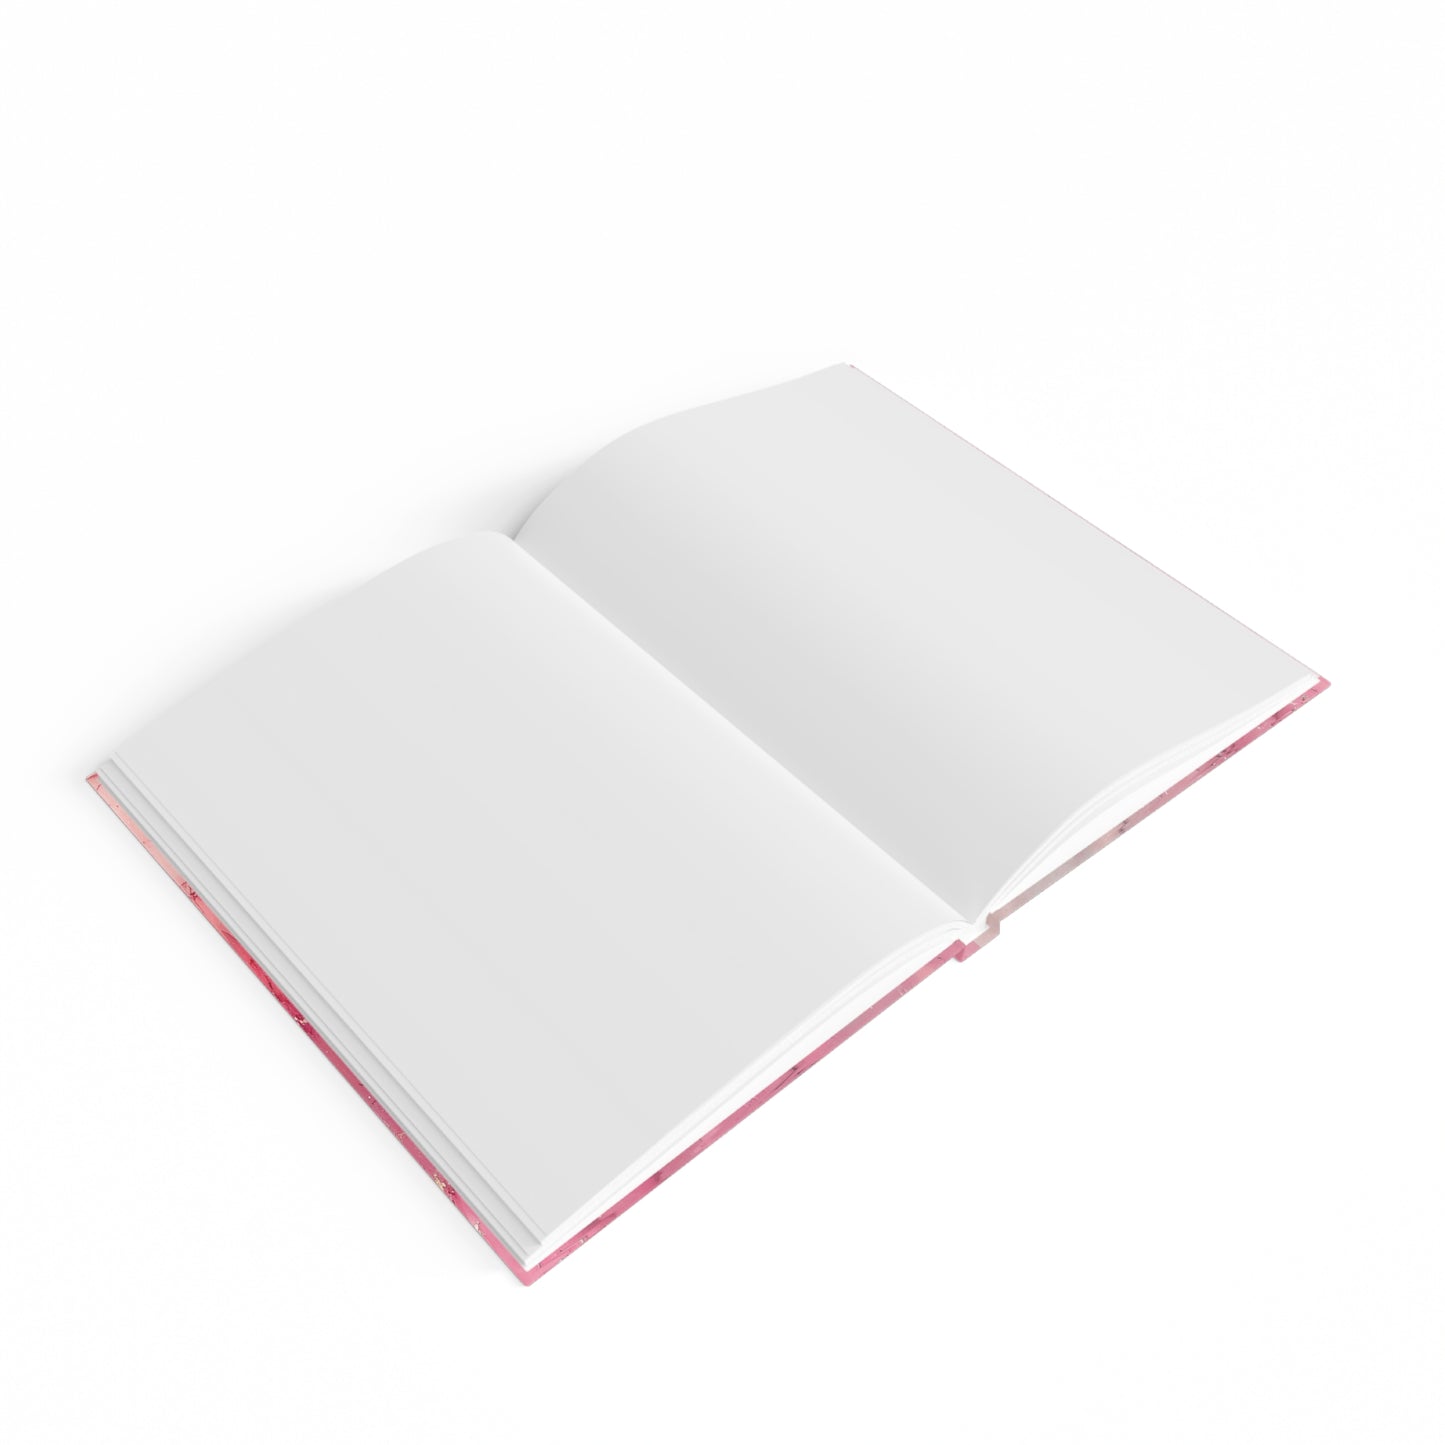 Pink Marble - Blank Notebook